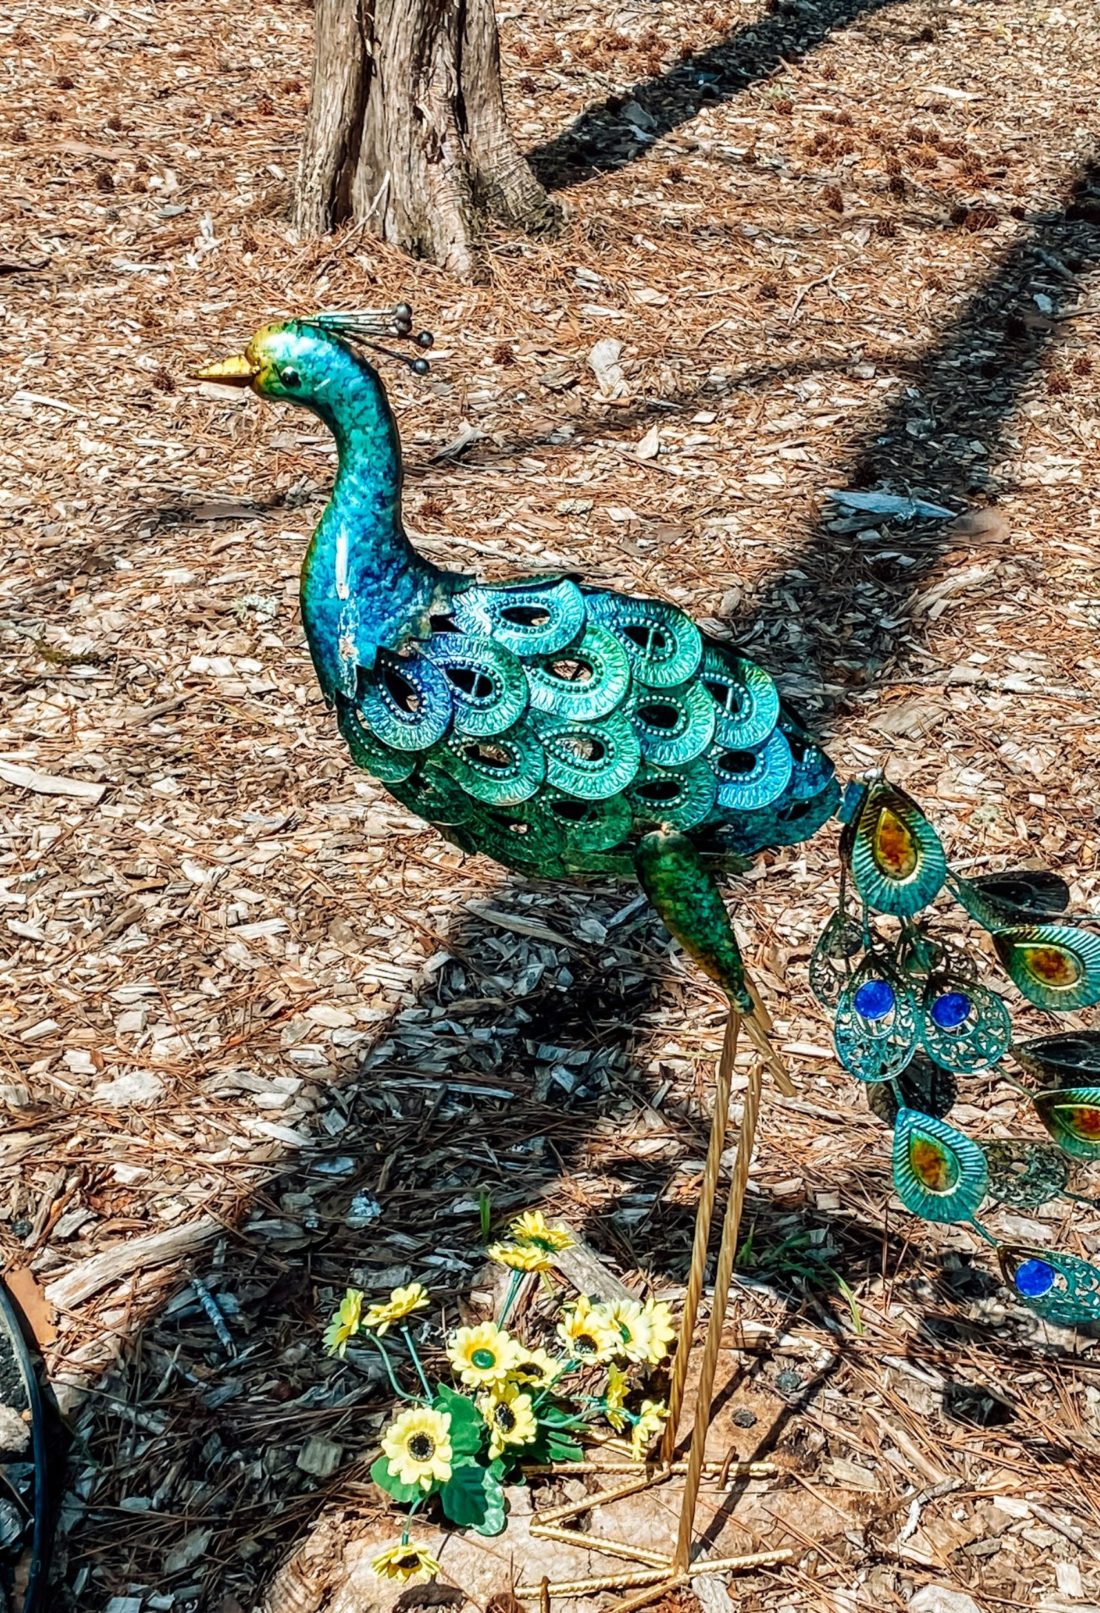 The Peacock That Got the Police Called